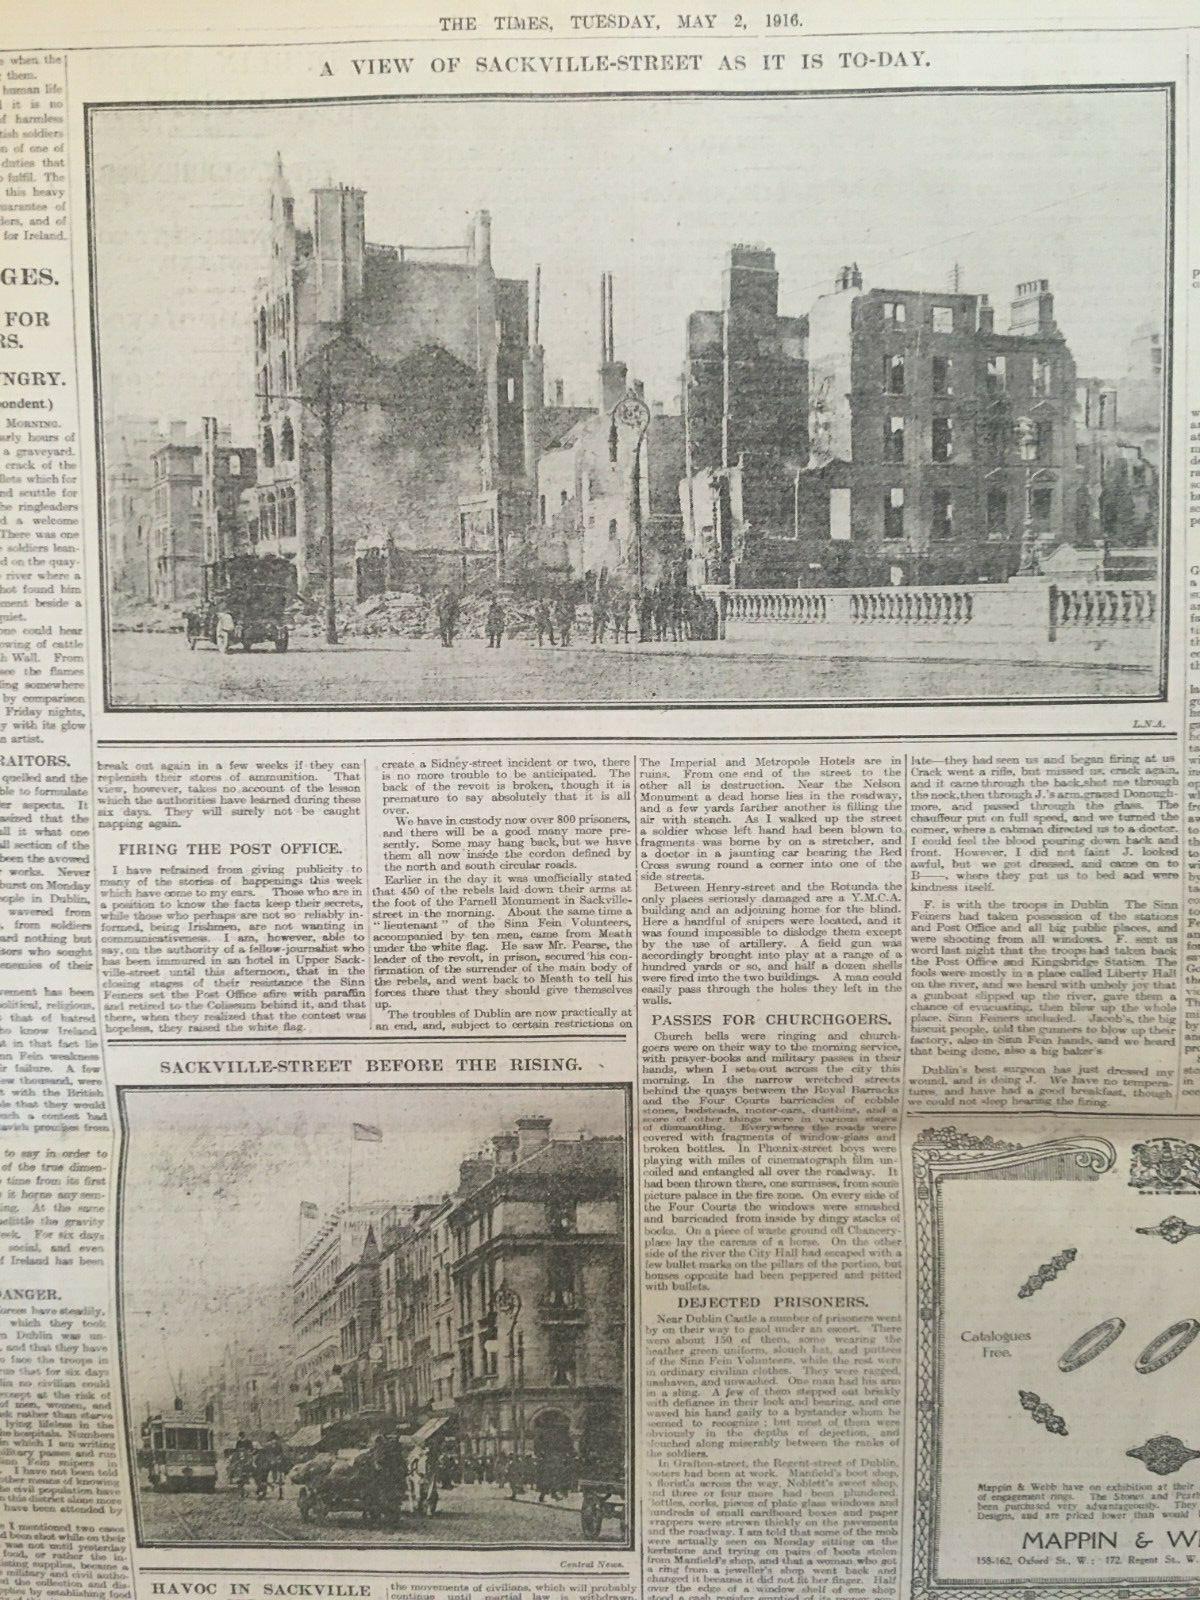 Easter Rising Rebellion 1916 Original Complete Newspaper 2nd May Images & Reports